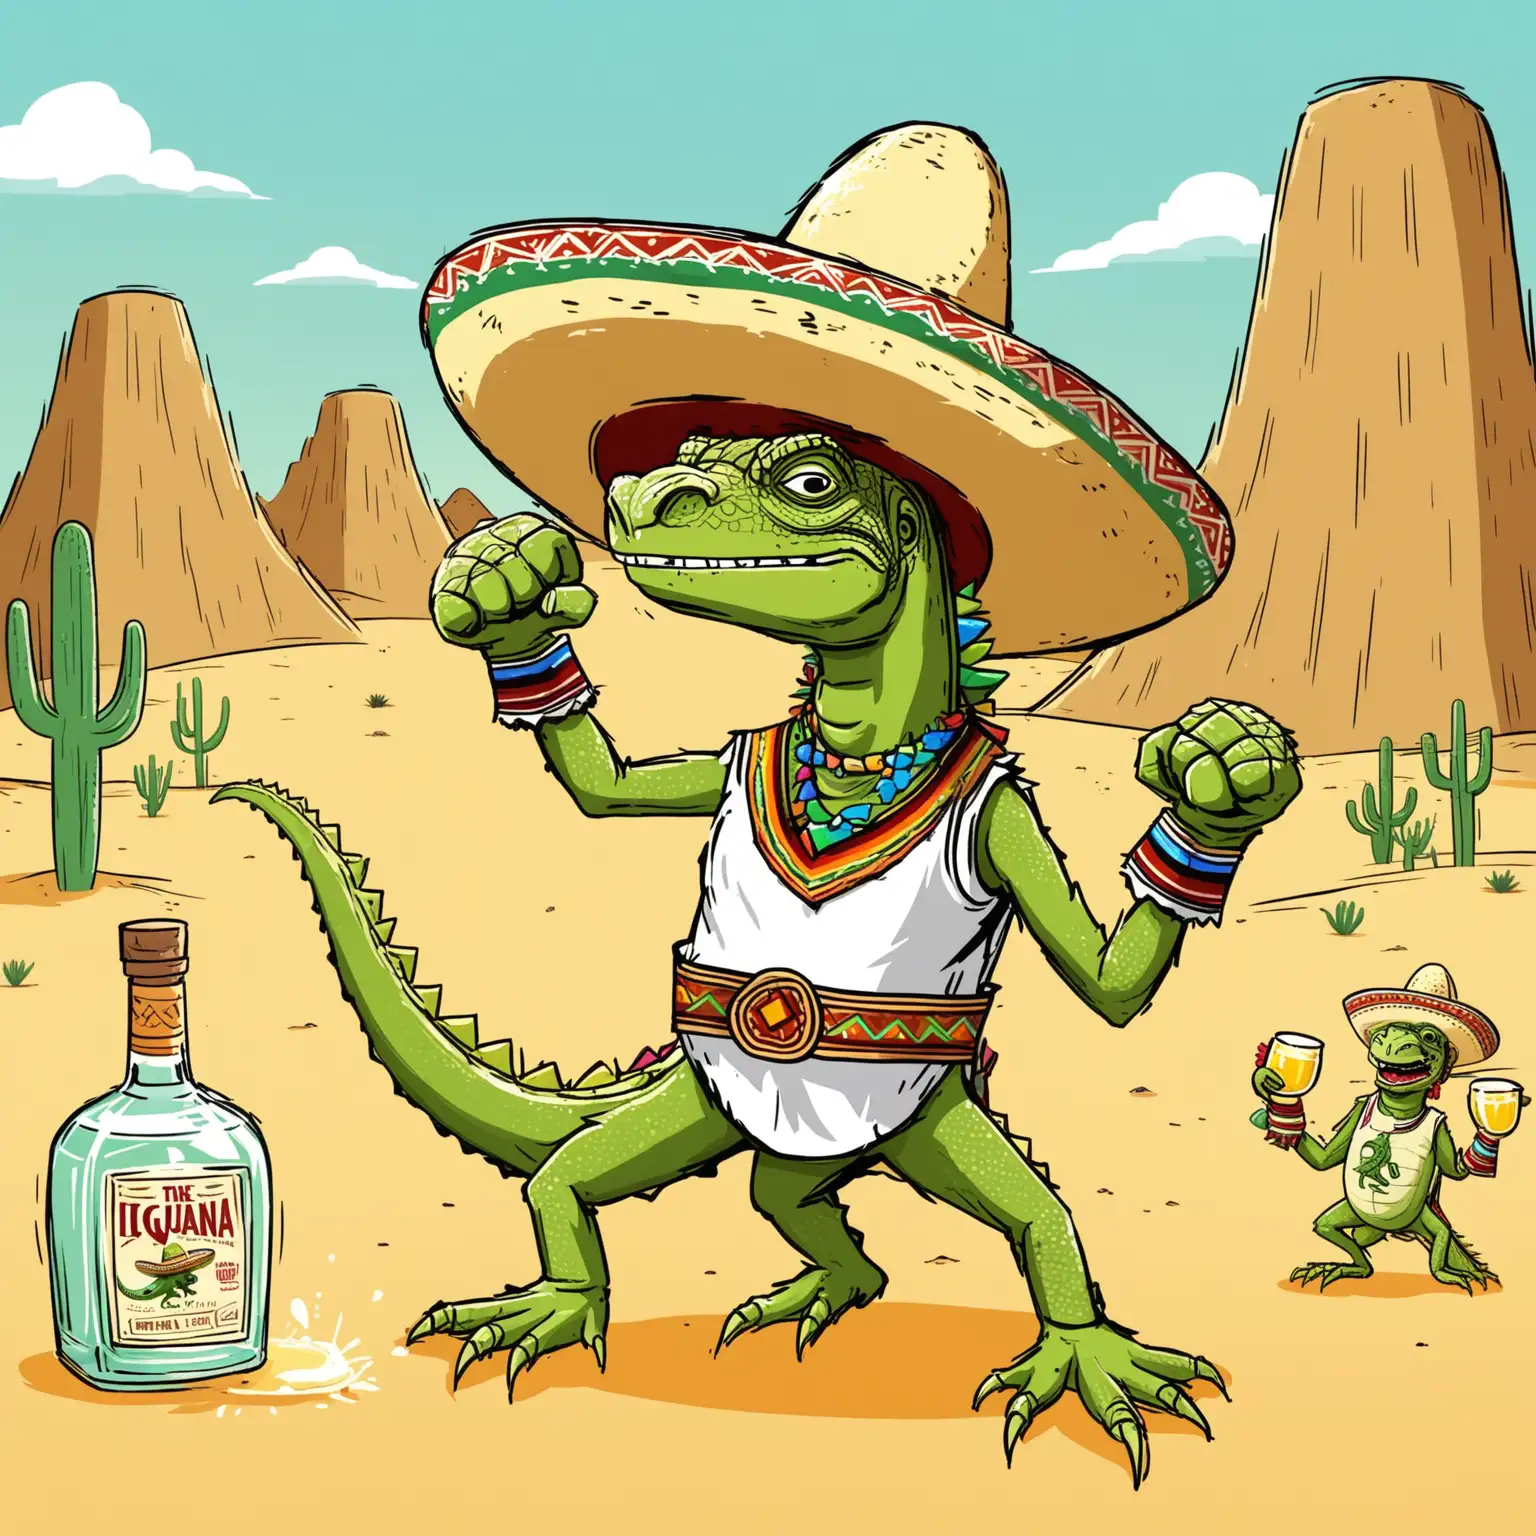 Cartoon Mexican making tequila, in the desert, wearing a sombrero, boxing an iquana